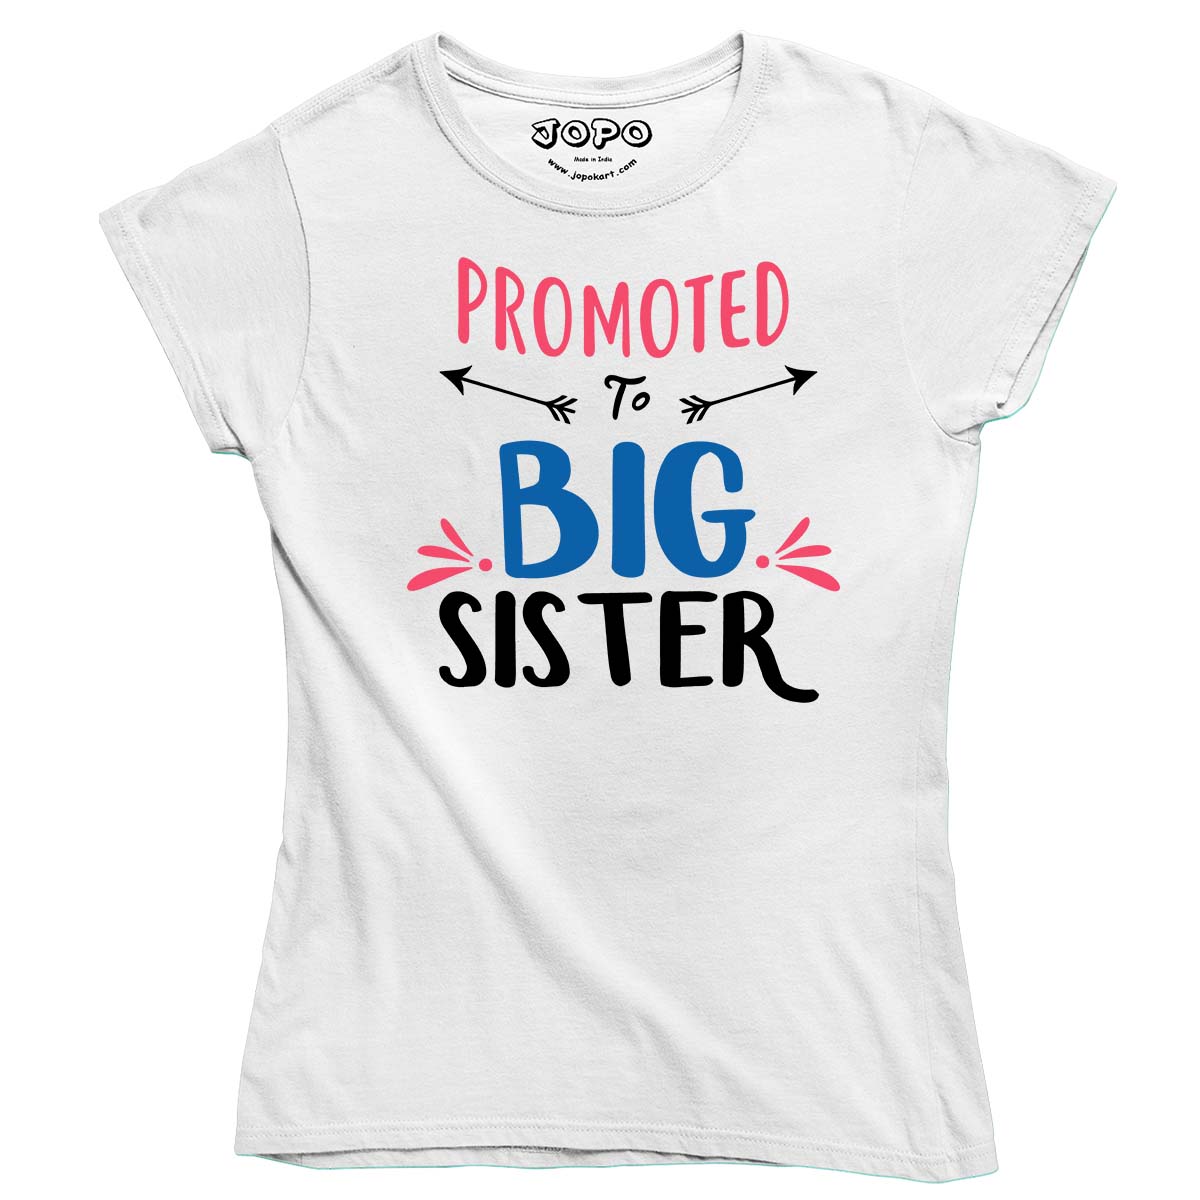 Promoted to big Sister white